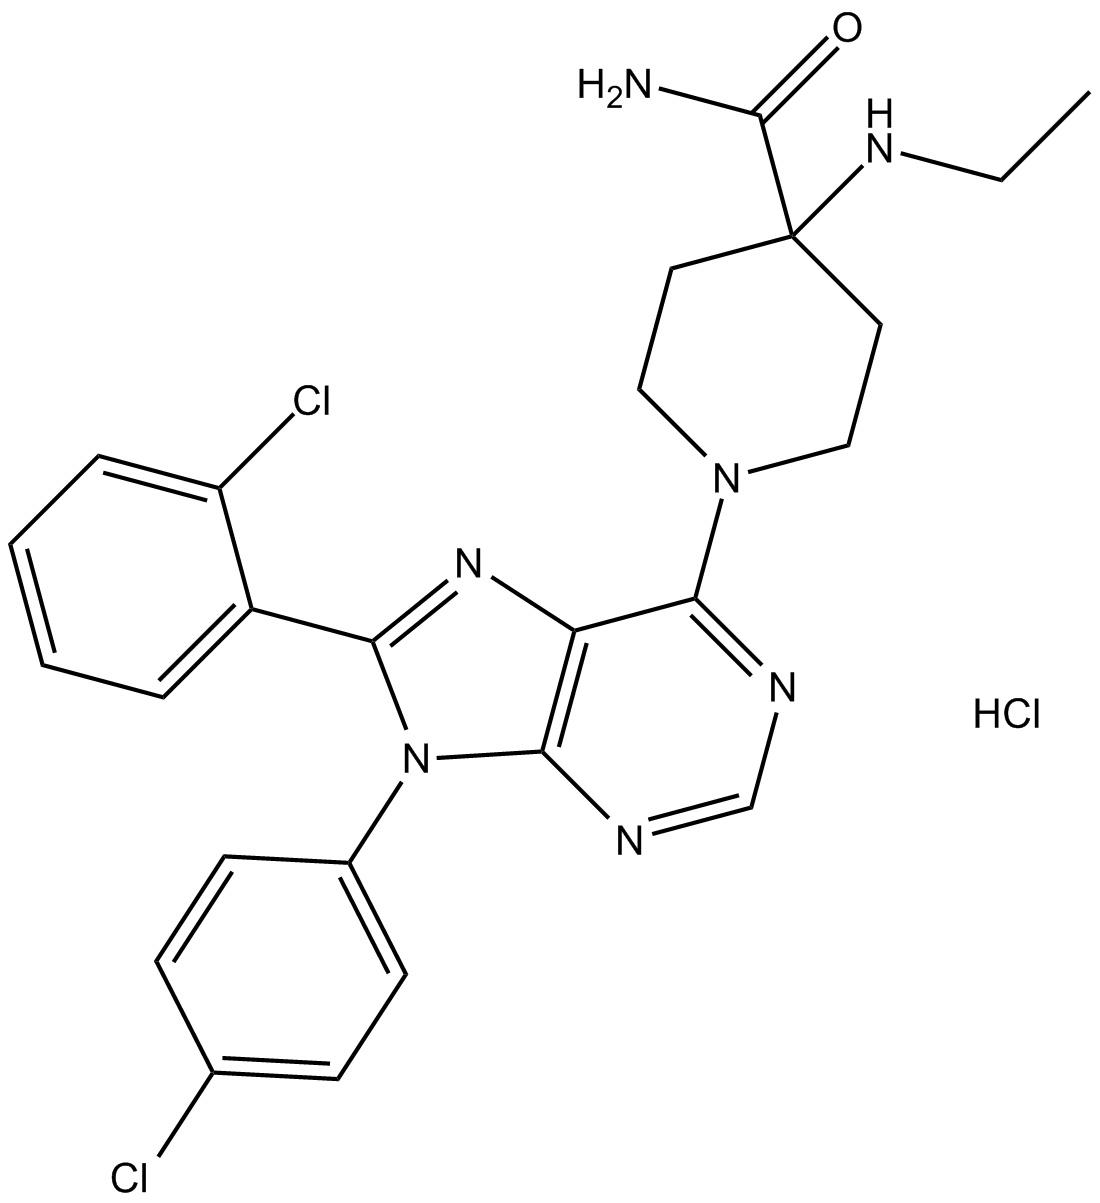 CP-945598 HCl  Chemical Structure